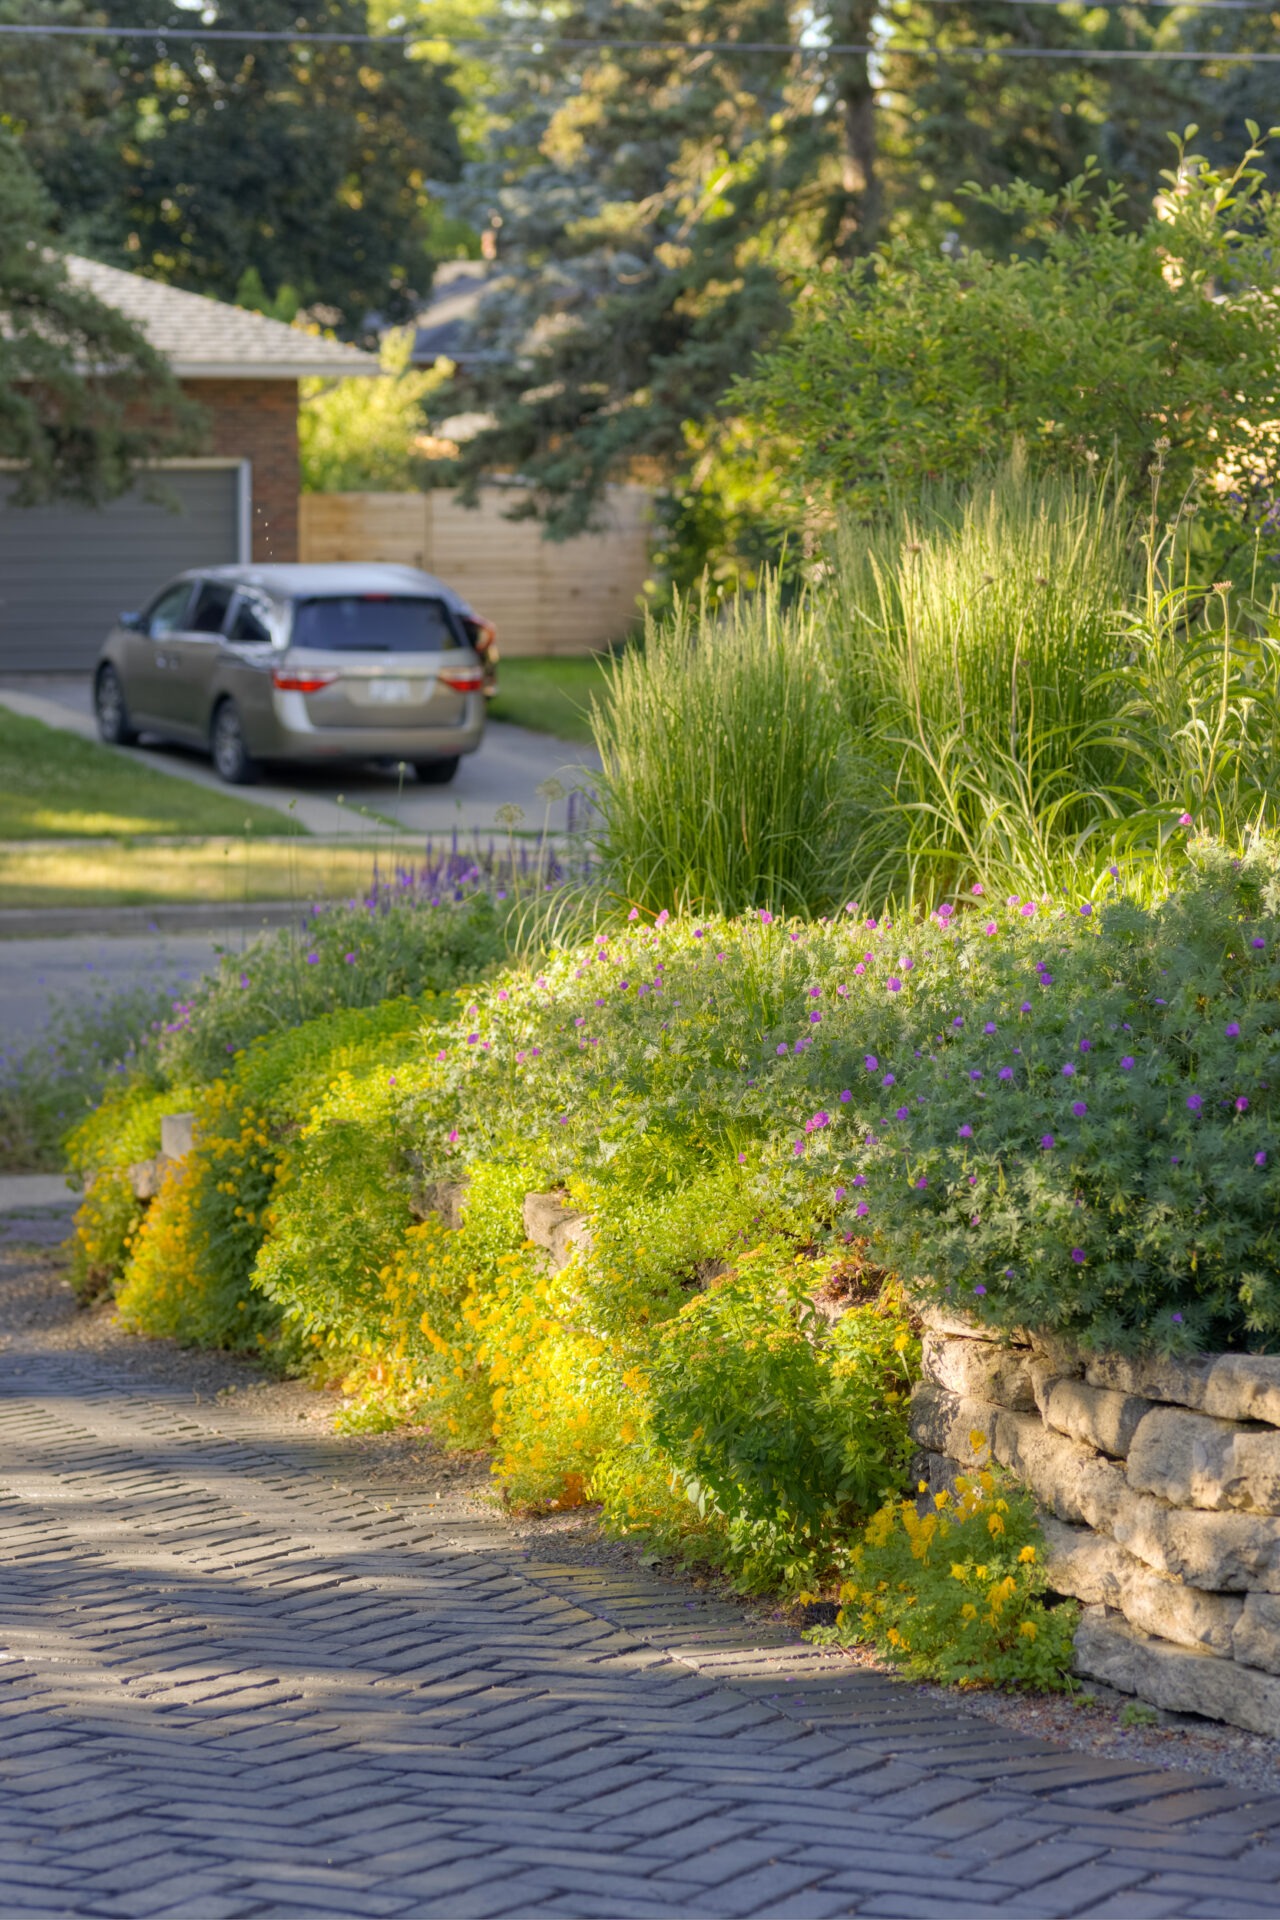 A cobblestone driveway leads to a house with lush flowerbeds and tall grasses beside it, bathed in soft sunlight, with a car parked upfront.